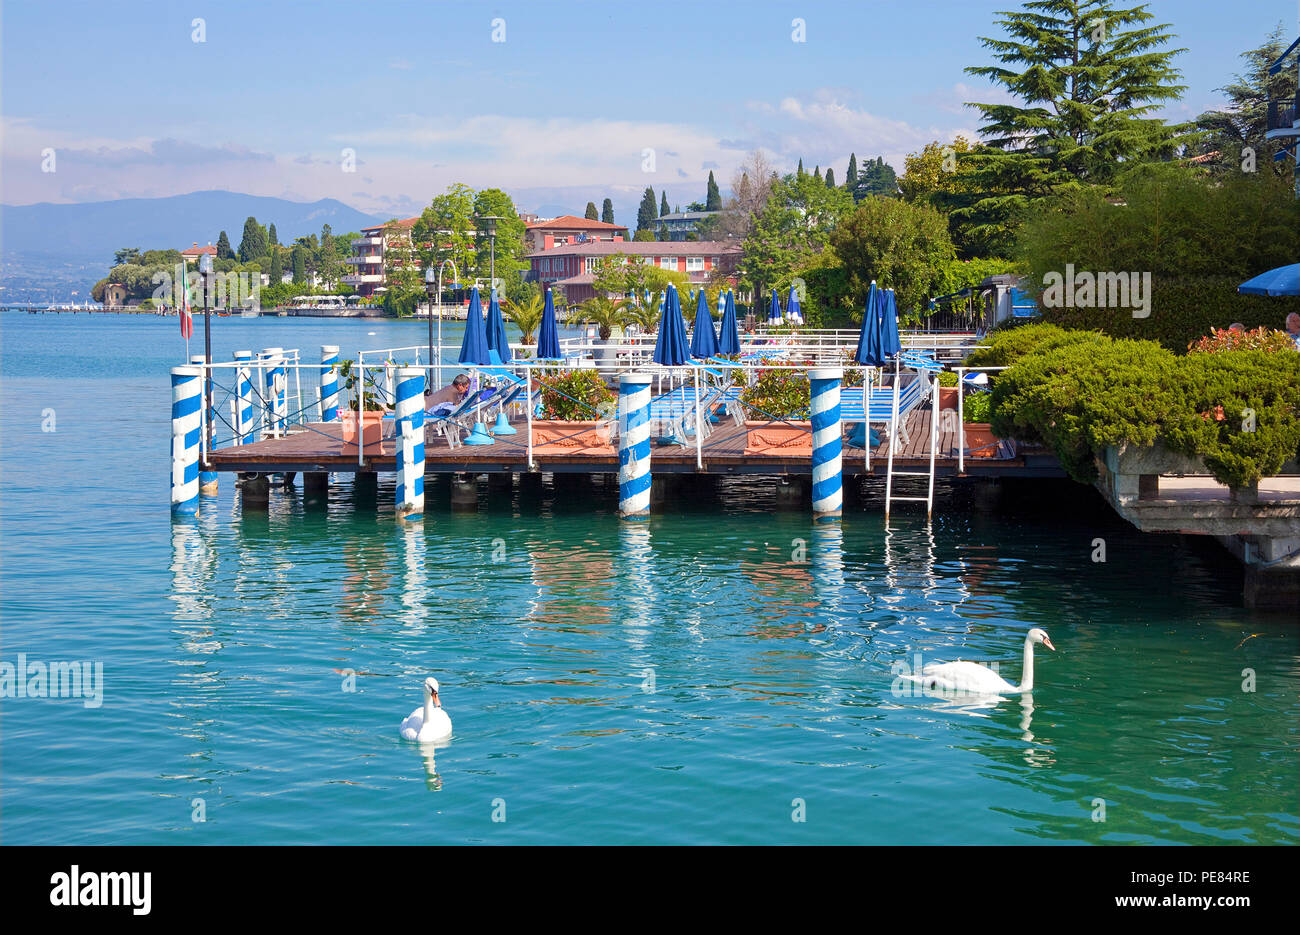 Sonnendeck am Seeufer von Sirmione, Gardasee, Lombardei, Italien | Sun deck at lakeside of Sirmione, Lake Garda, Lombardy, Italy Stock Photo